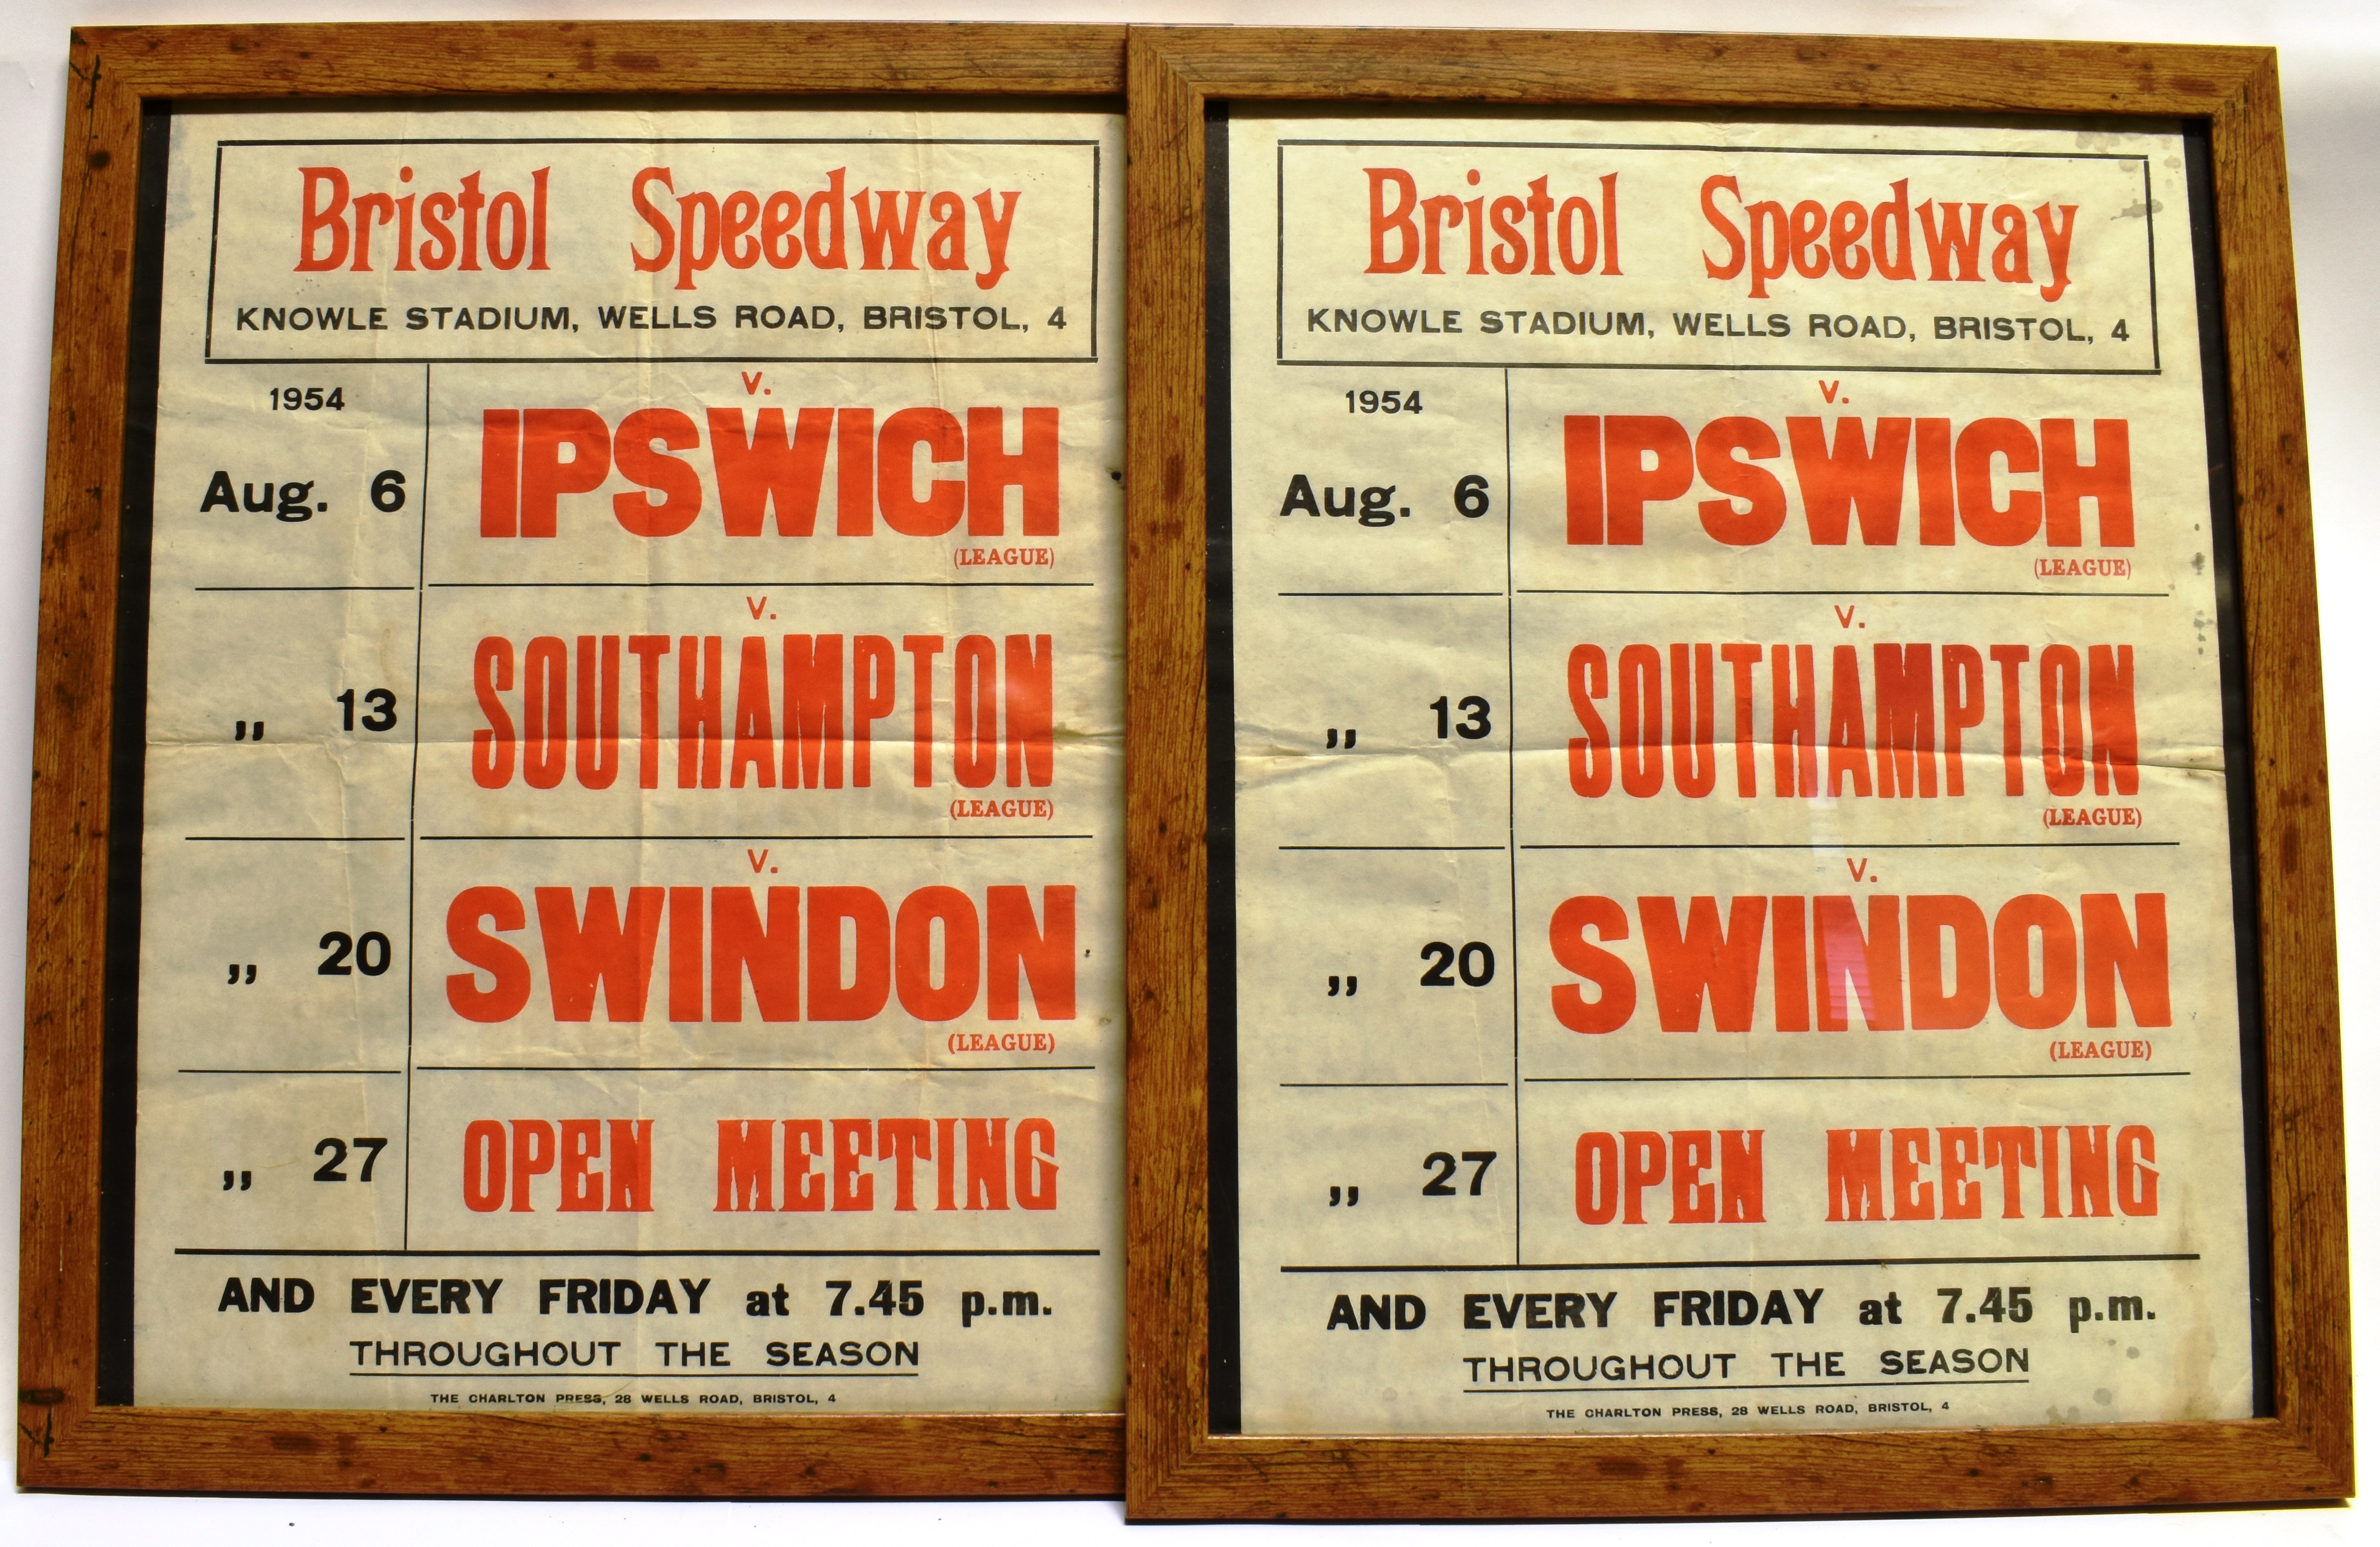 BRISTOL SPEEDWAY, KNOWLE STADIUM, BRISTOL. 4 - TWO 1950'S PRINTED ADVERTISING POSTER'S DATED